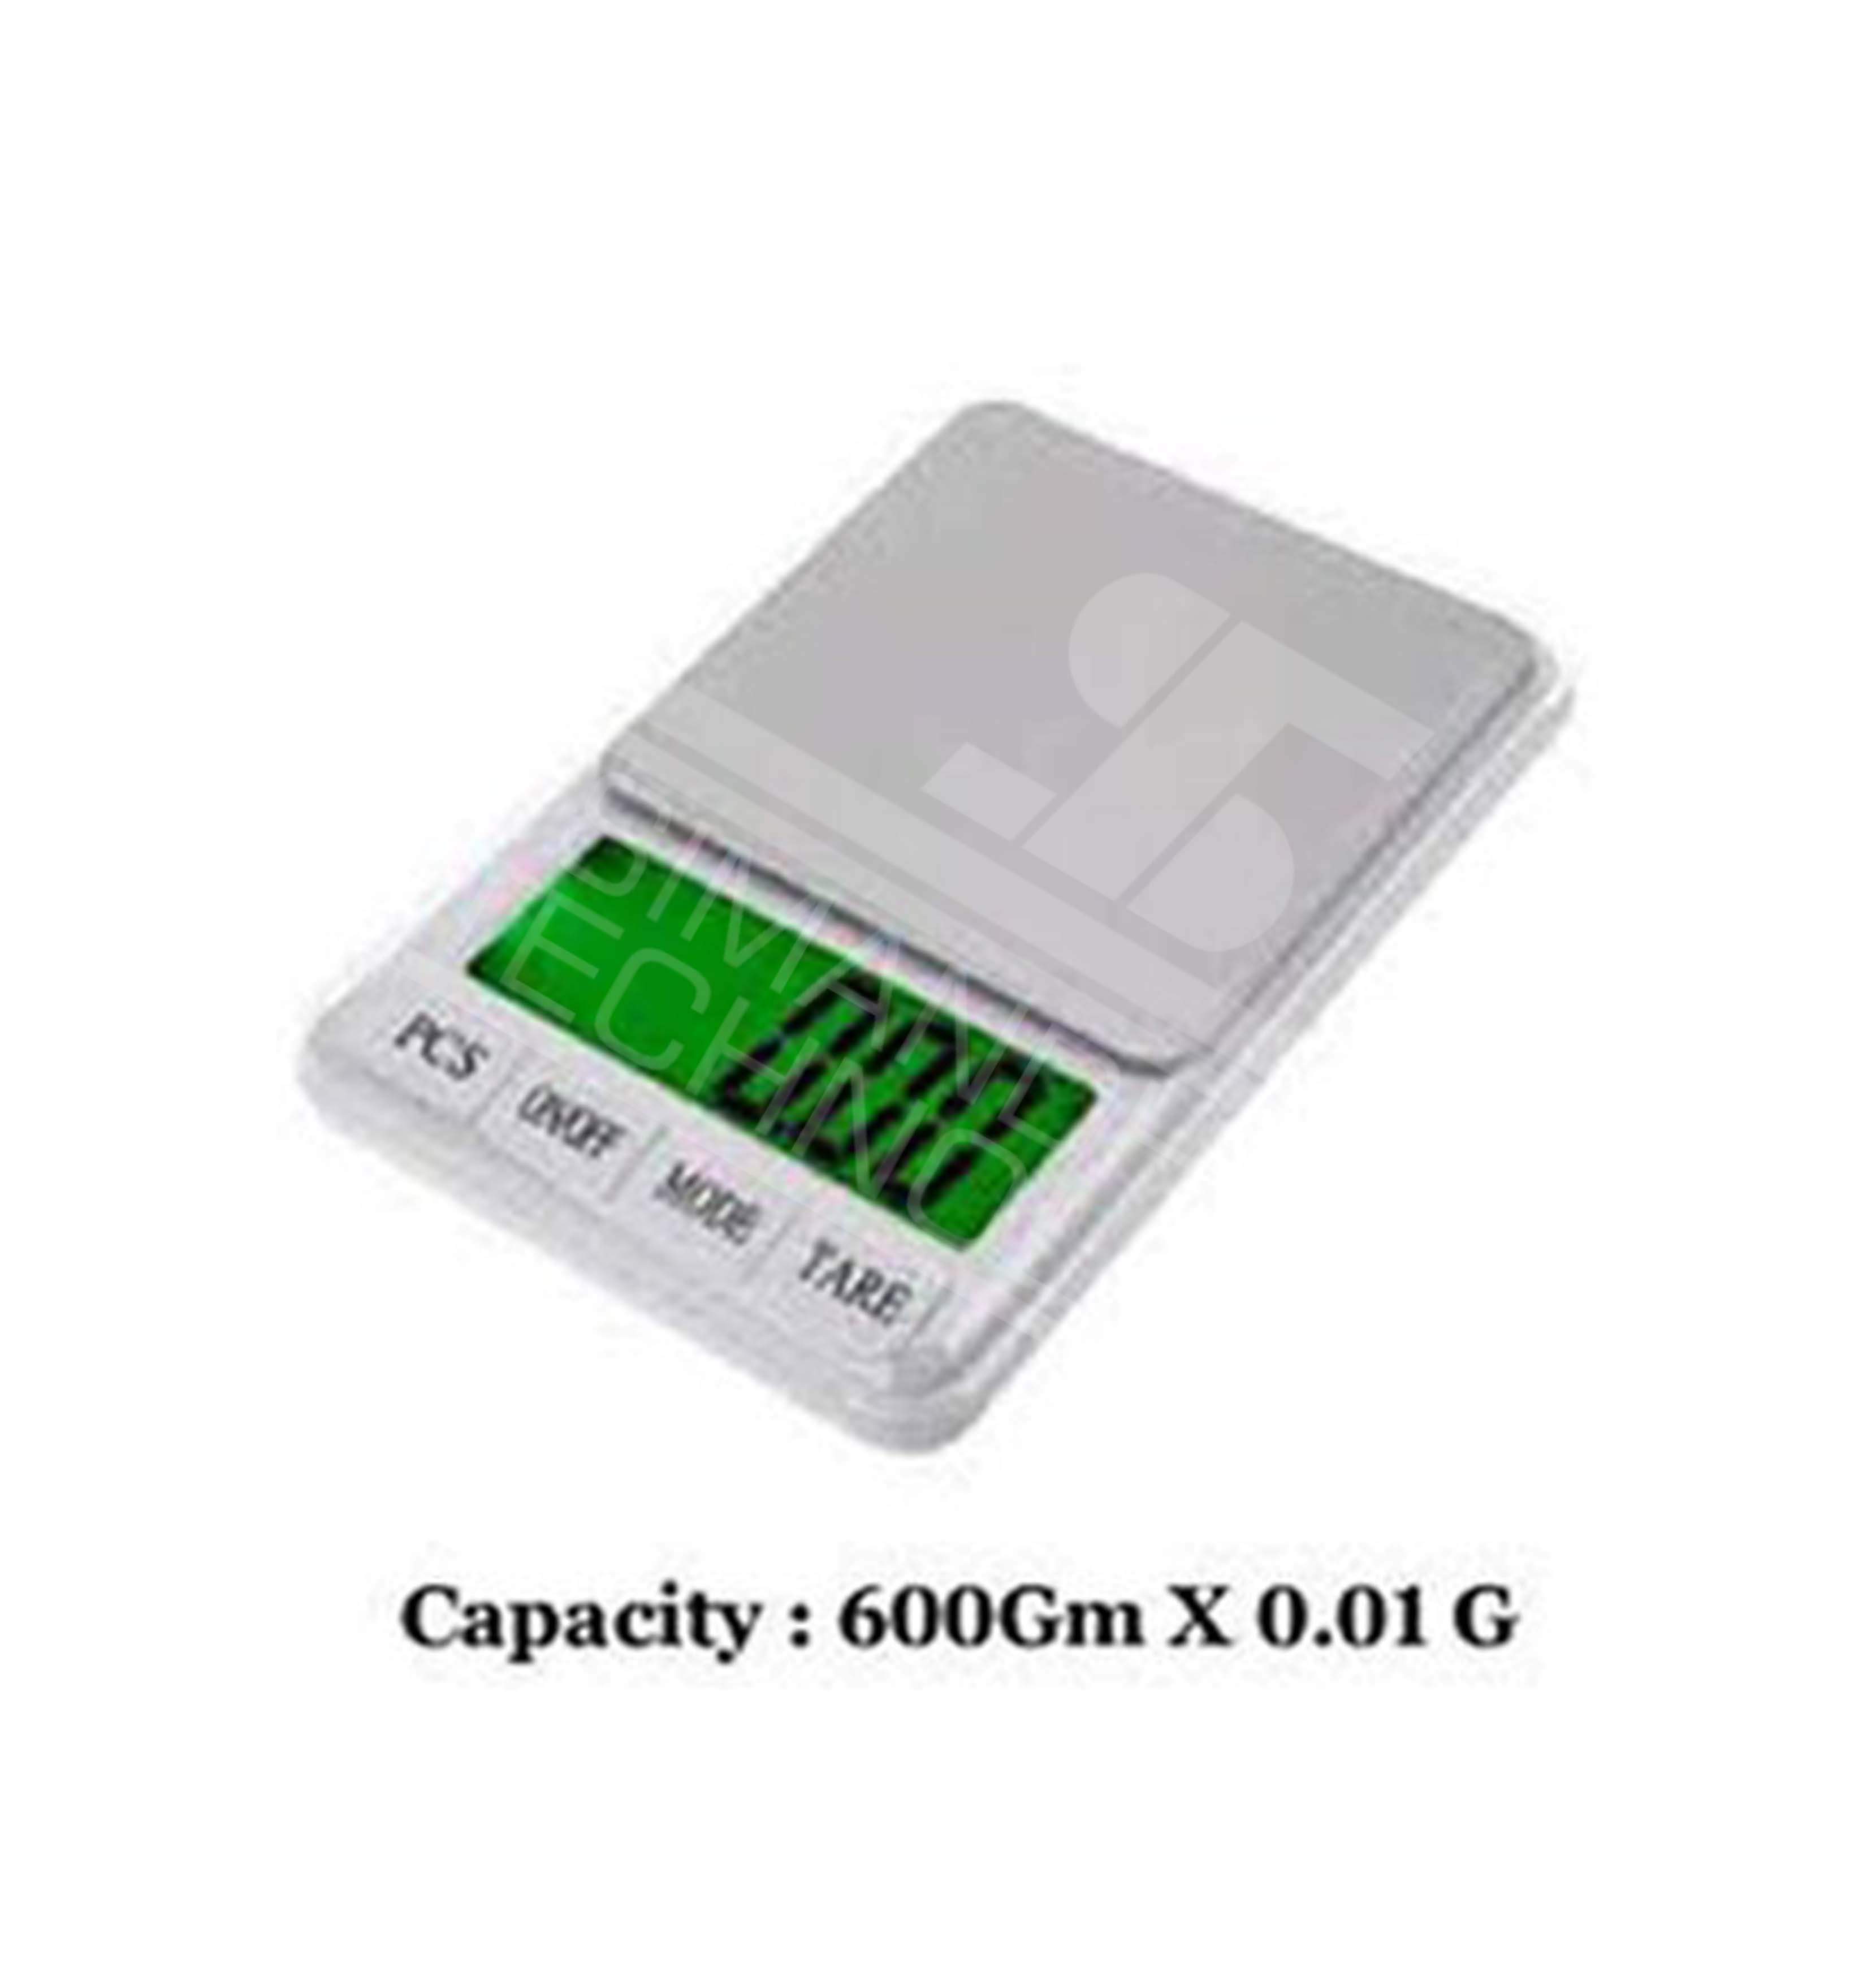 MH-887 Electronic Digital Scale 600 Gm X 0.01 G